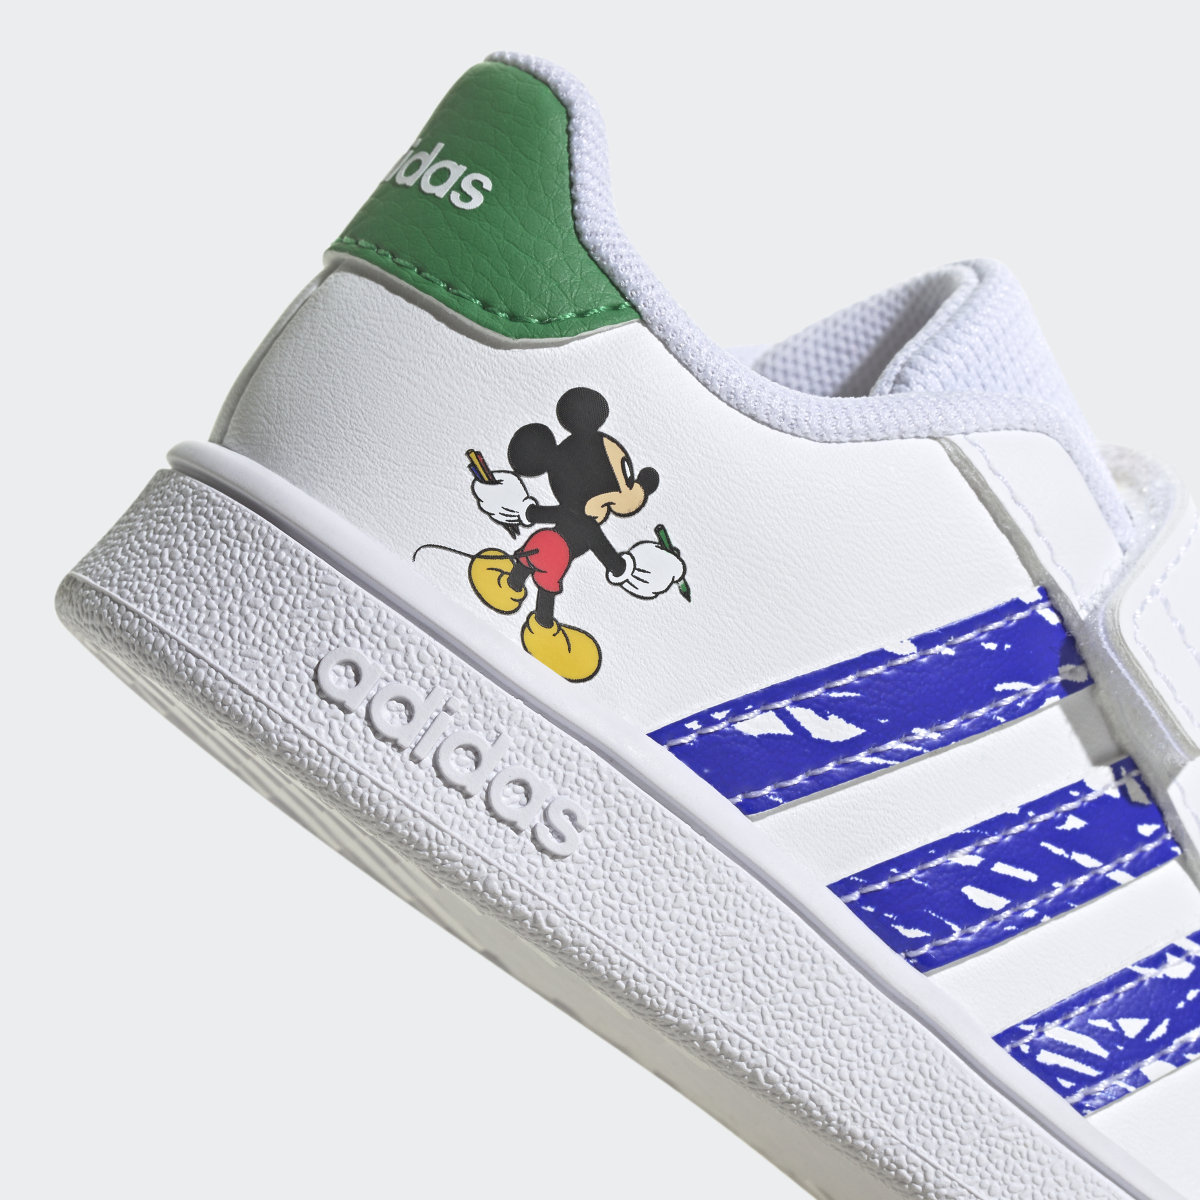 Adidas x Disney Minnie Mouse Grand Court Shoes. 9